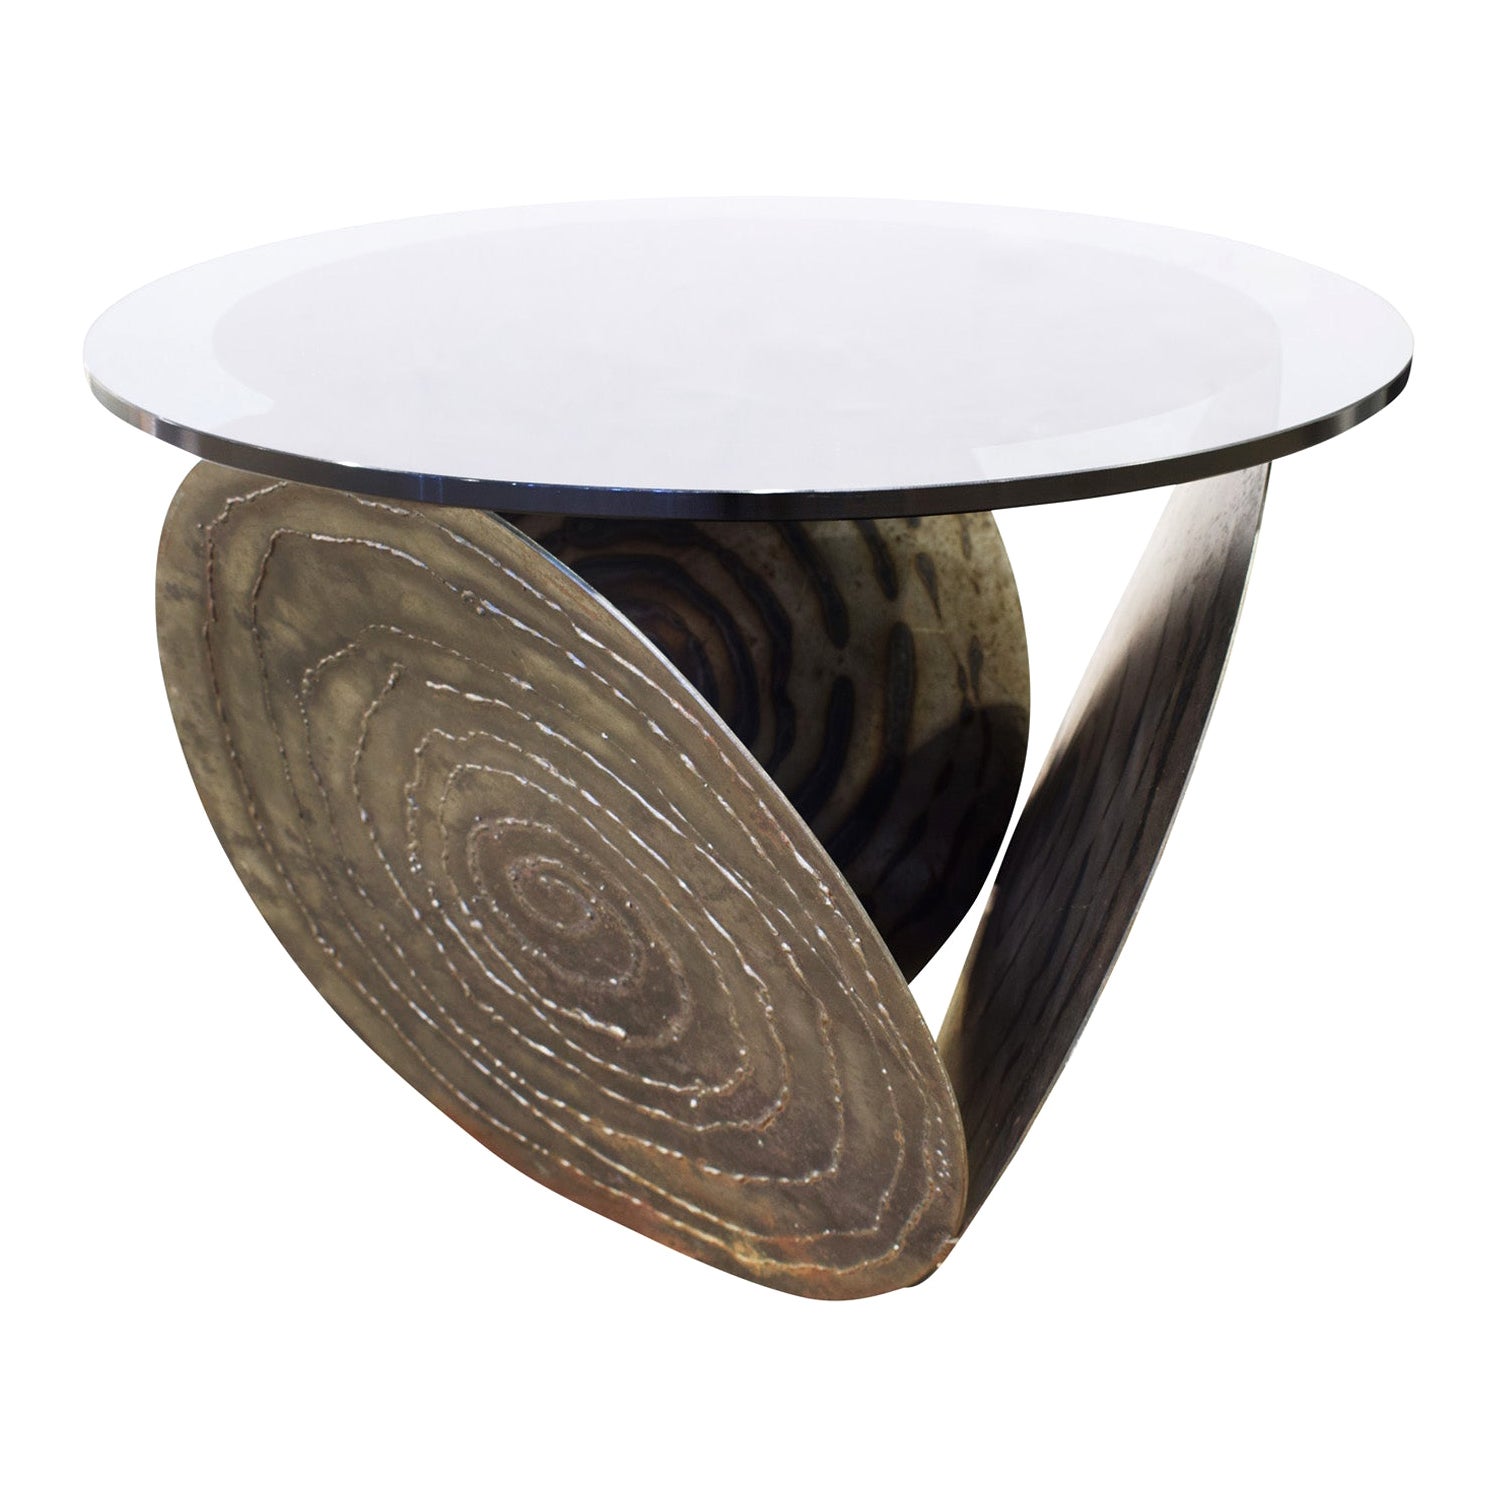 Sculptural Welded Side Table with Smoke Glass Top, 1970s For Sale